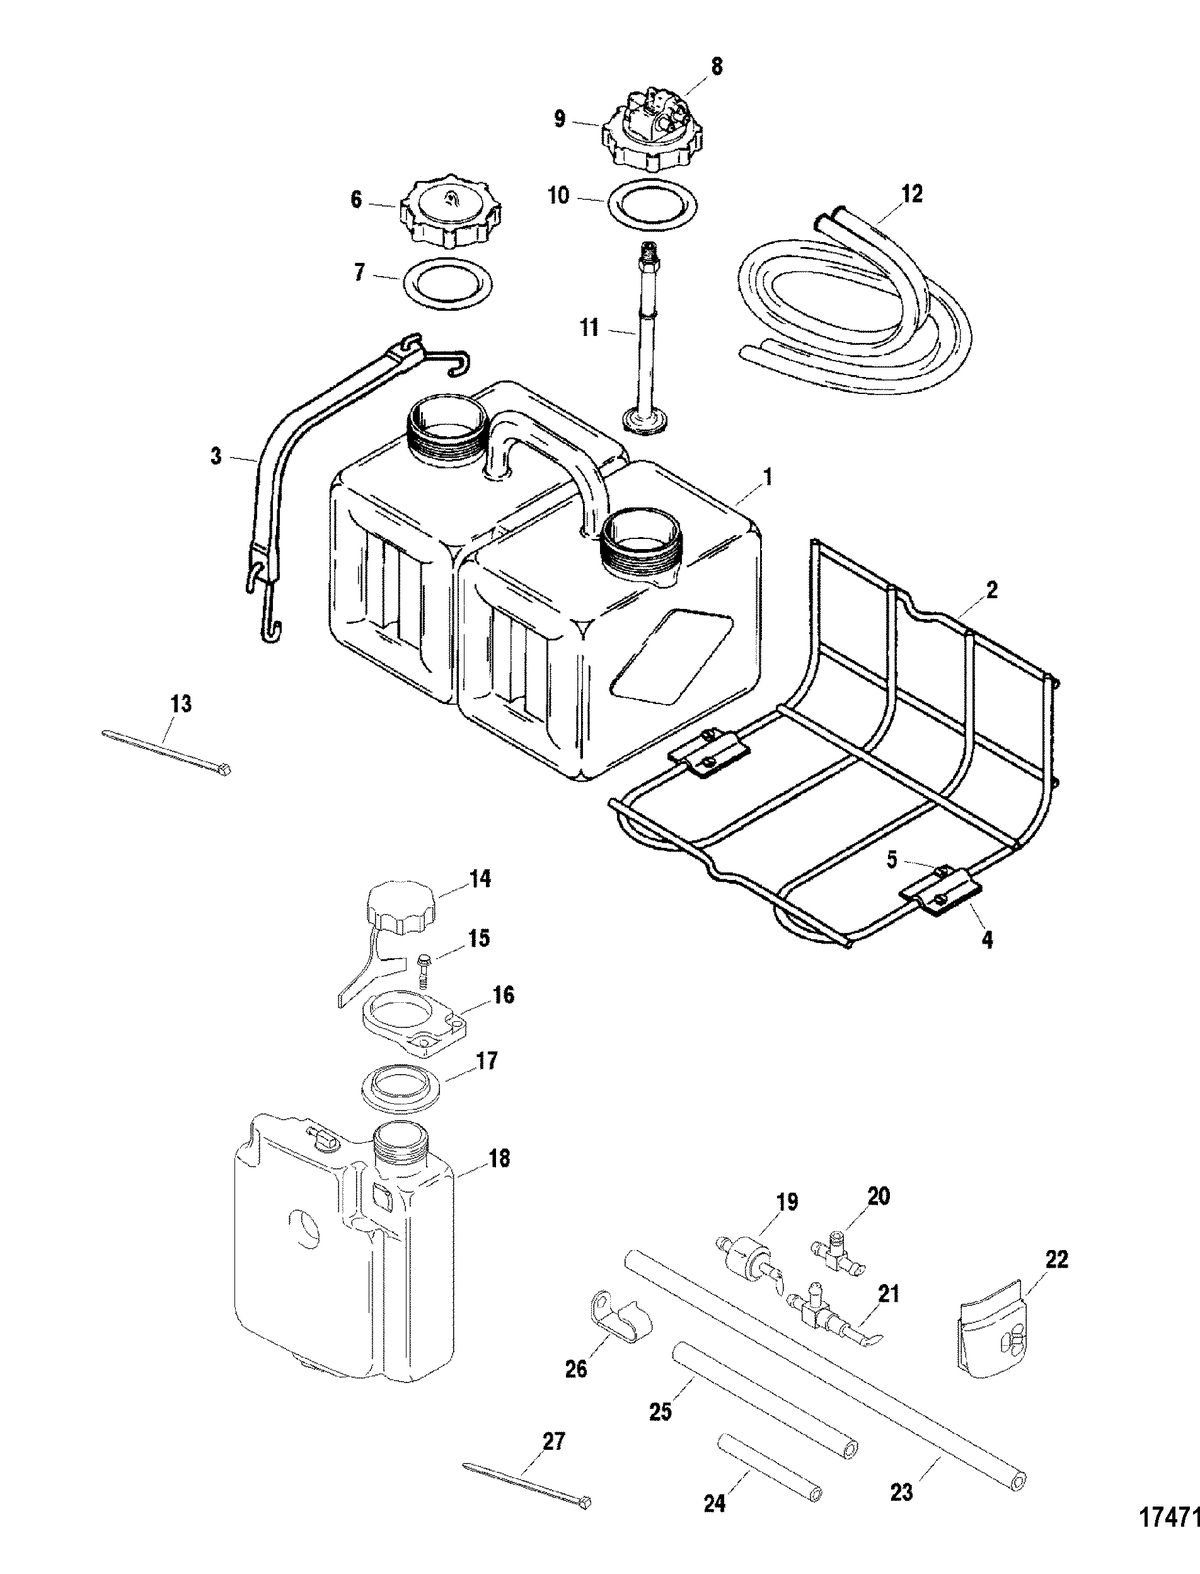 ACCESSORIES FUEL/OIL TANKS, LINES, FILTER KITS AND CORROSION Tank Kit-Remote Oil(1255-8627A9)